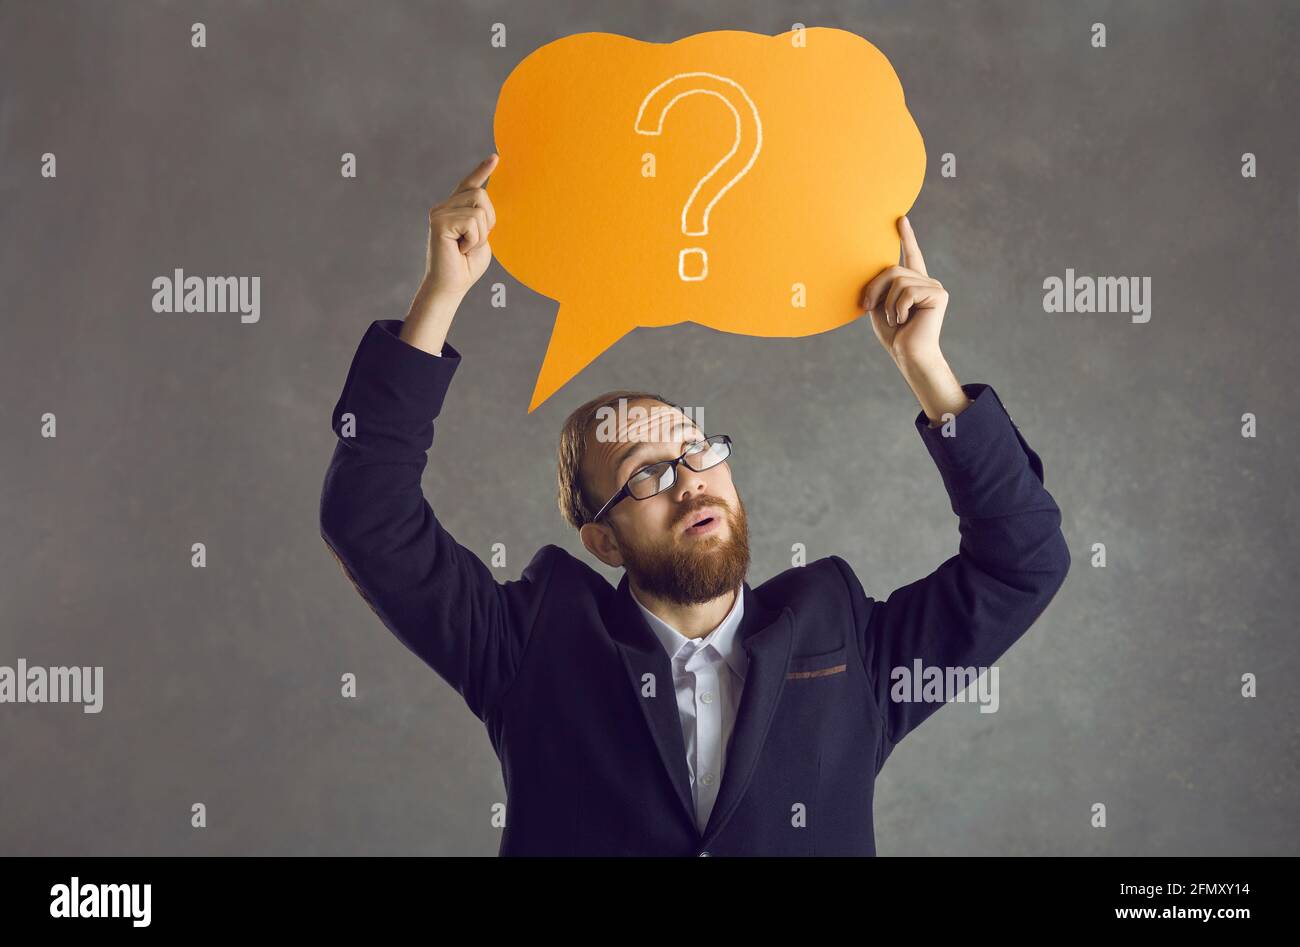 Sceptical businessman in suit and glasses holding speech bubble with question mark Stock Photo